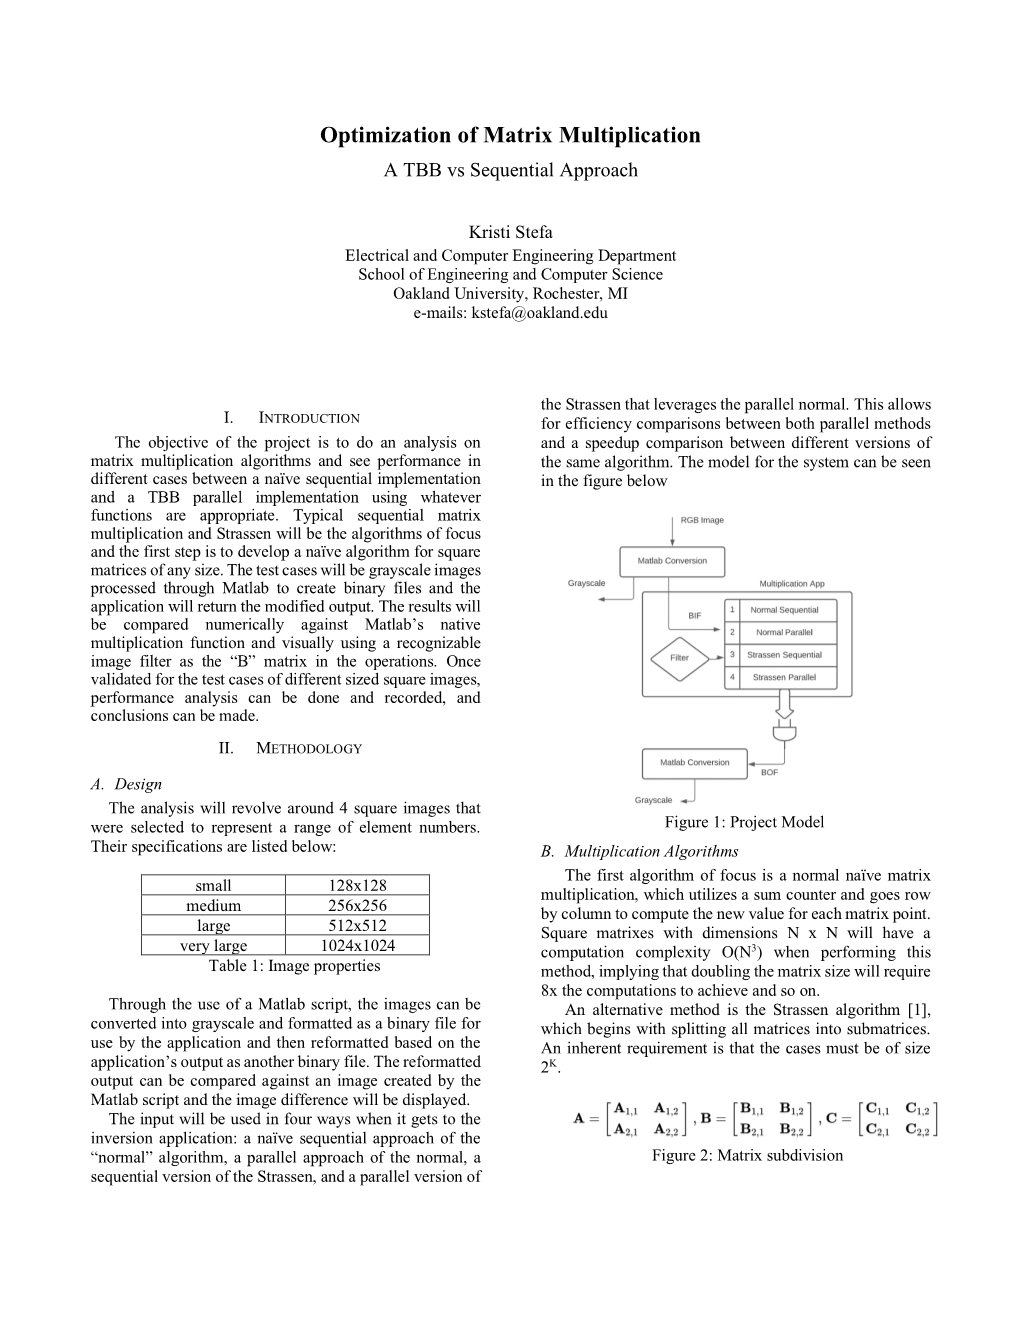 Optimization of Matrix Multiplication a TBB Vs Sequential Approach